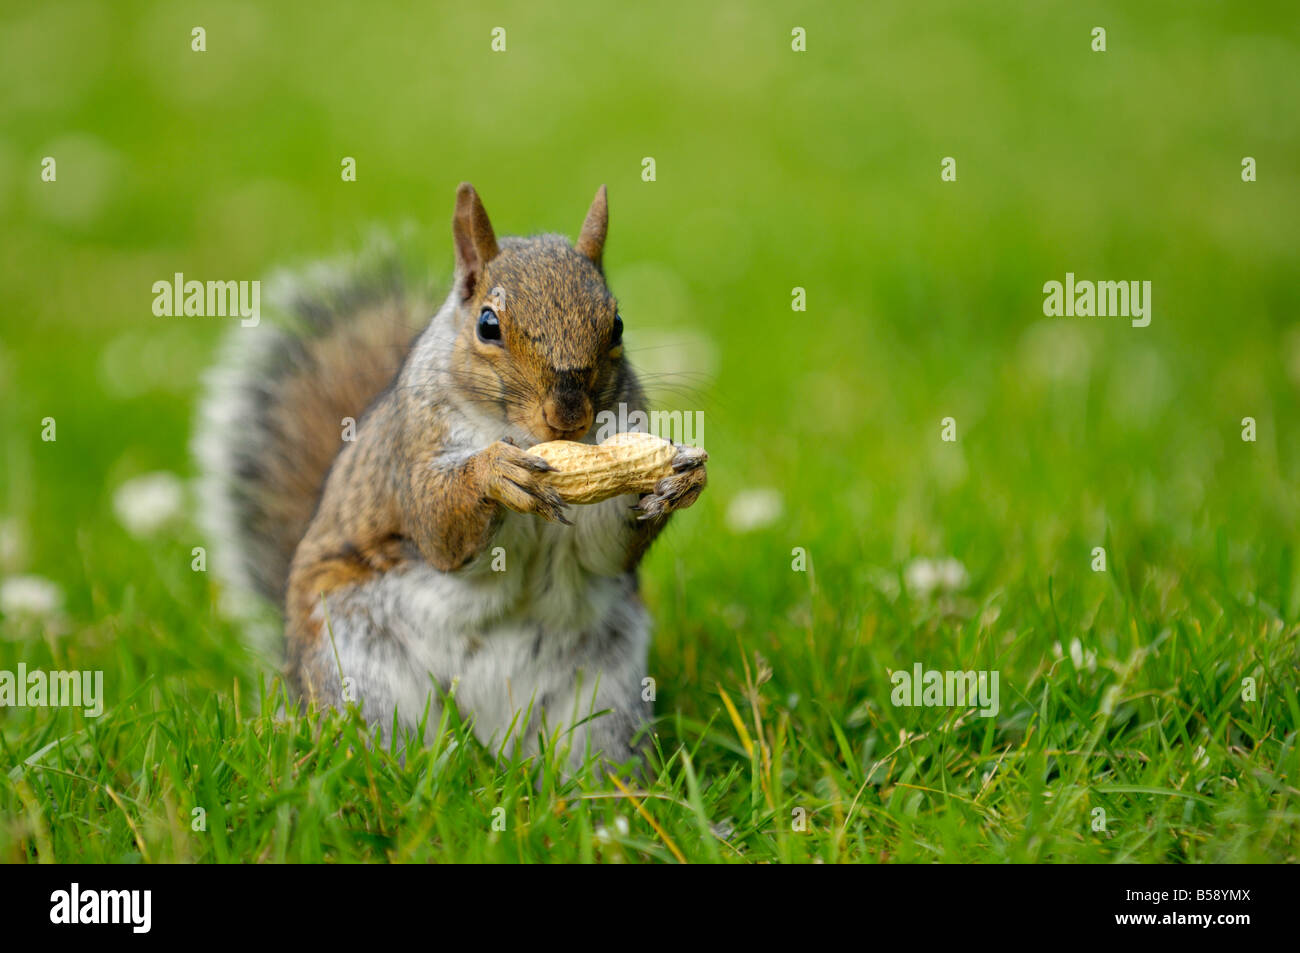 Gray squirrel eating a peanut Stock Photo